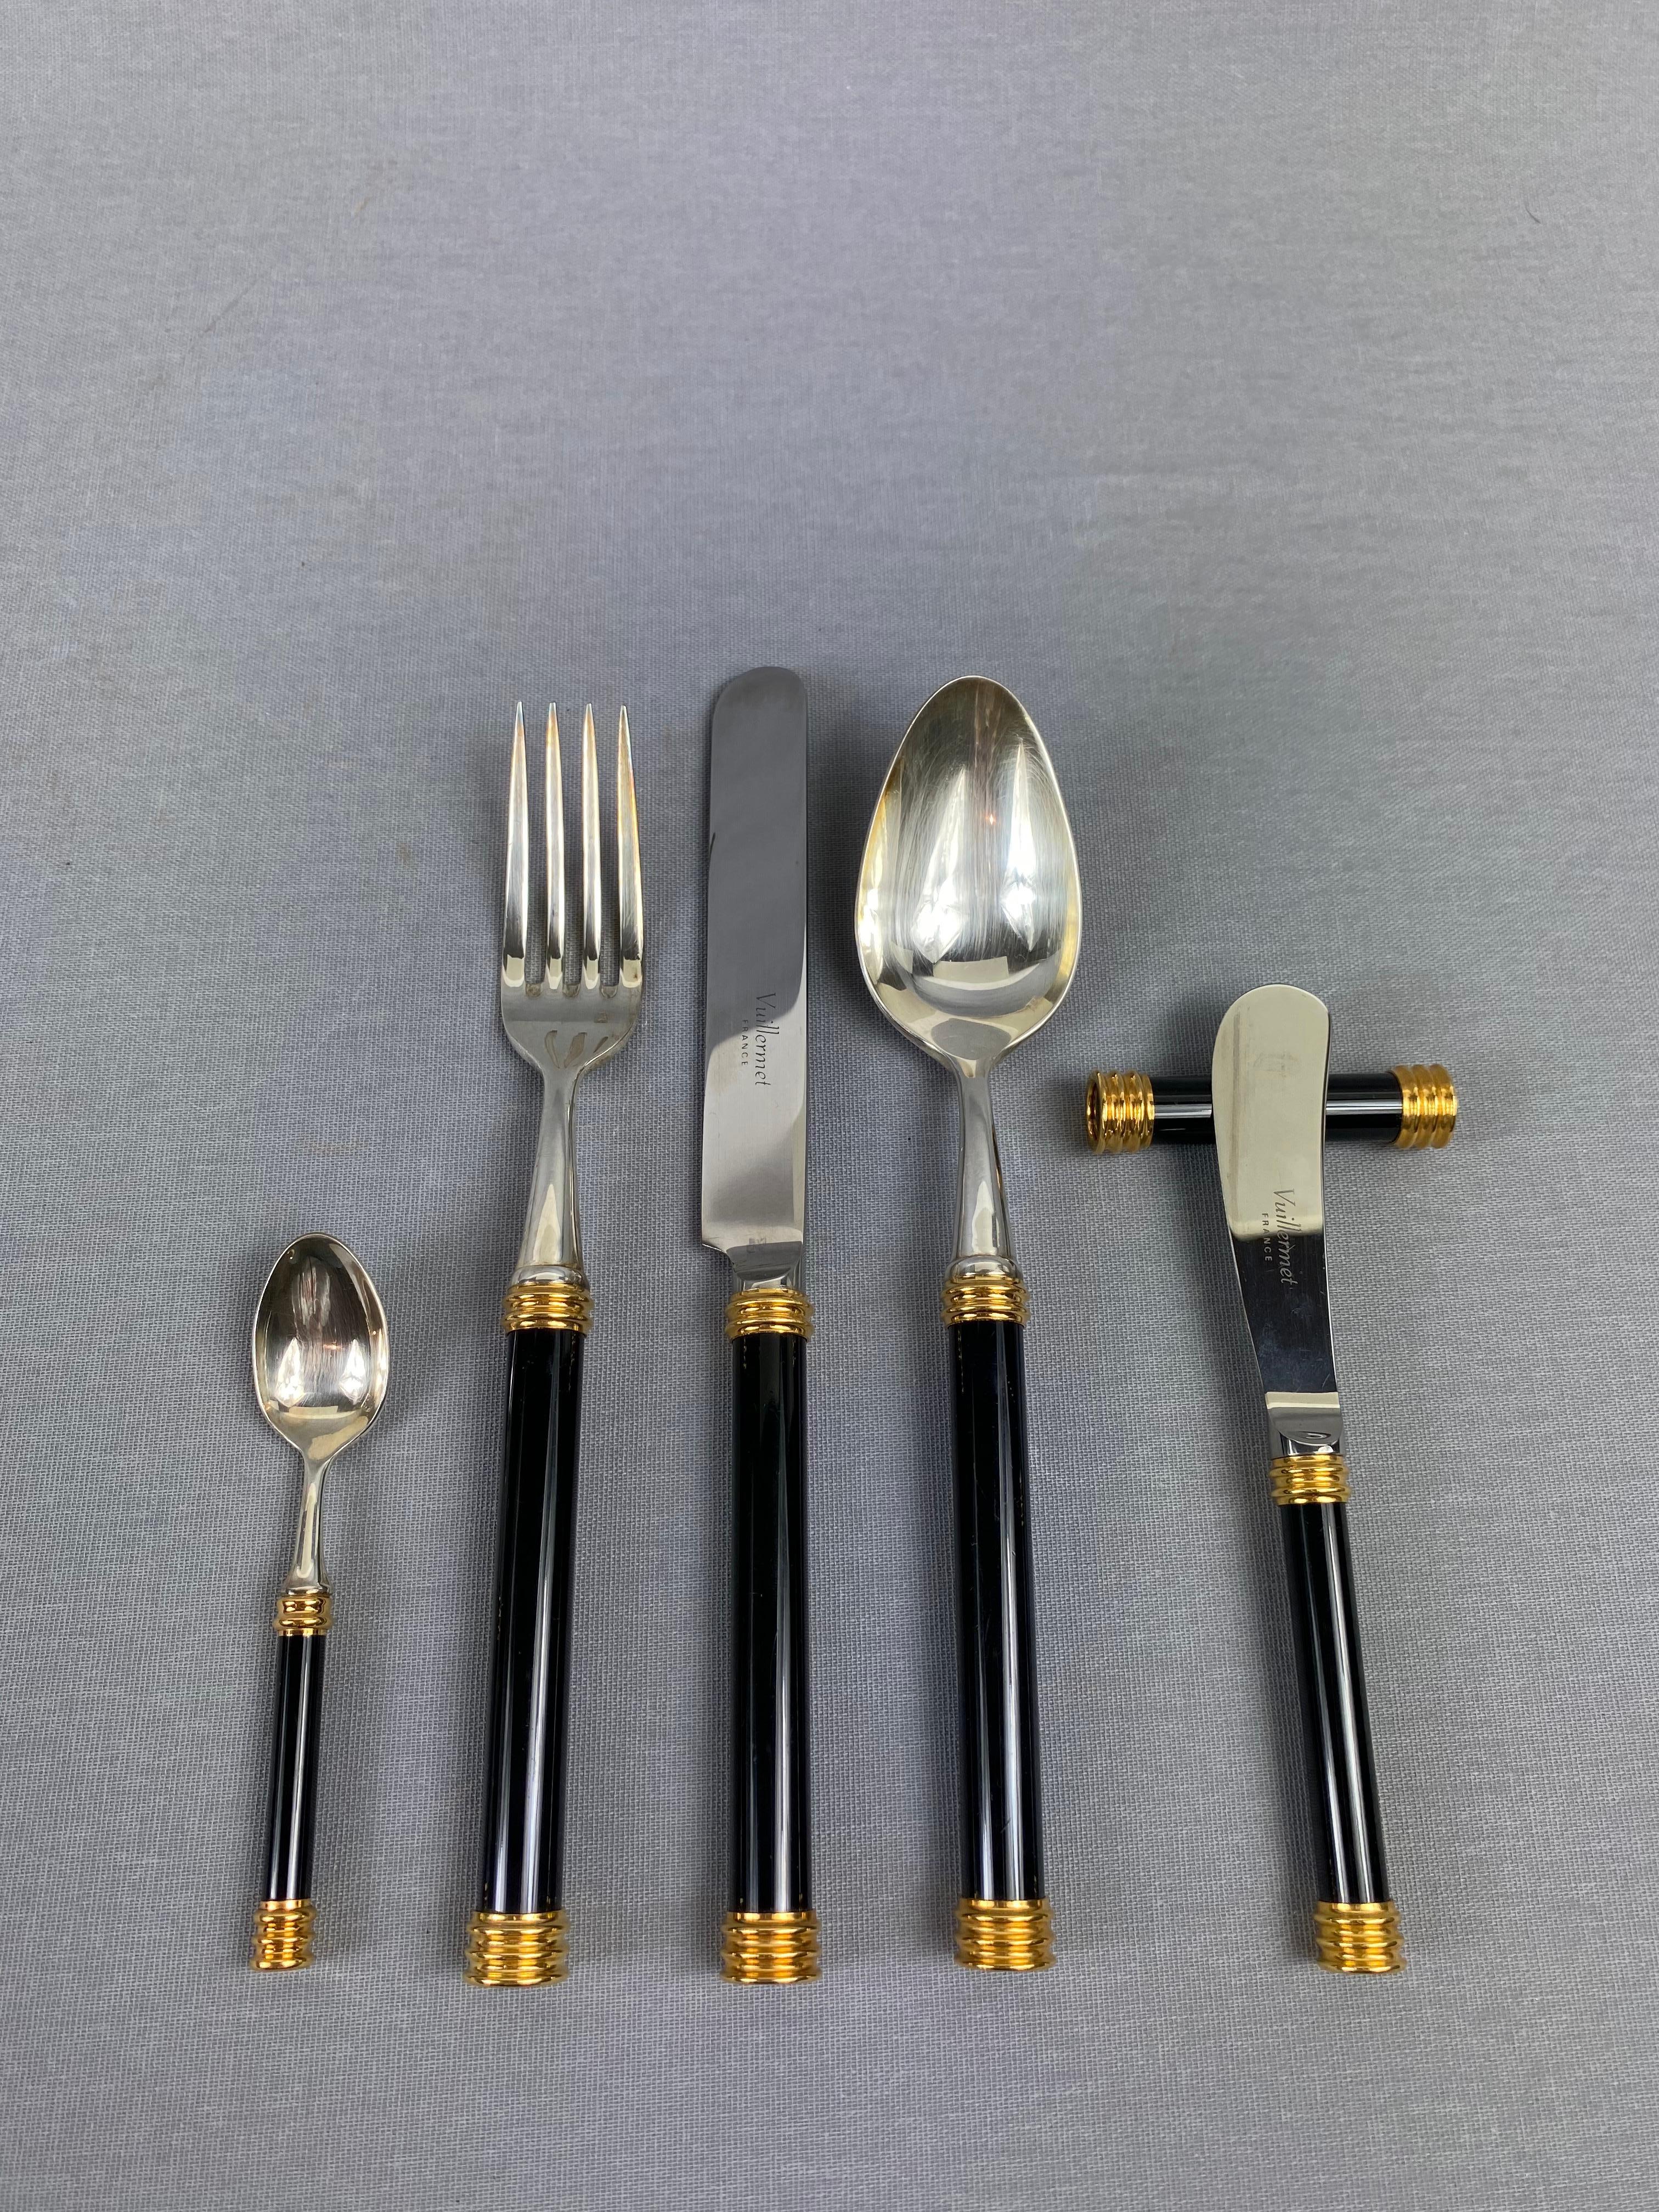 Large and Rare Vuillermet France Cutlery Set in Black Gold with Knife Rests 60s 6